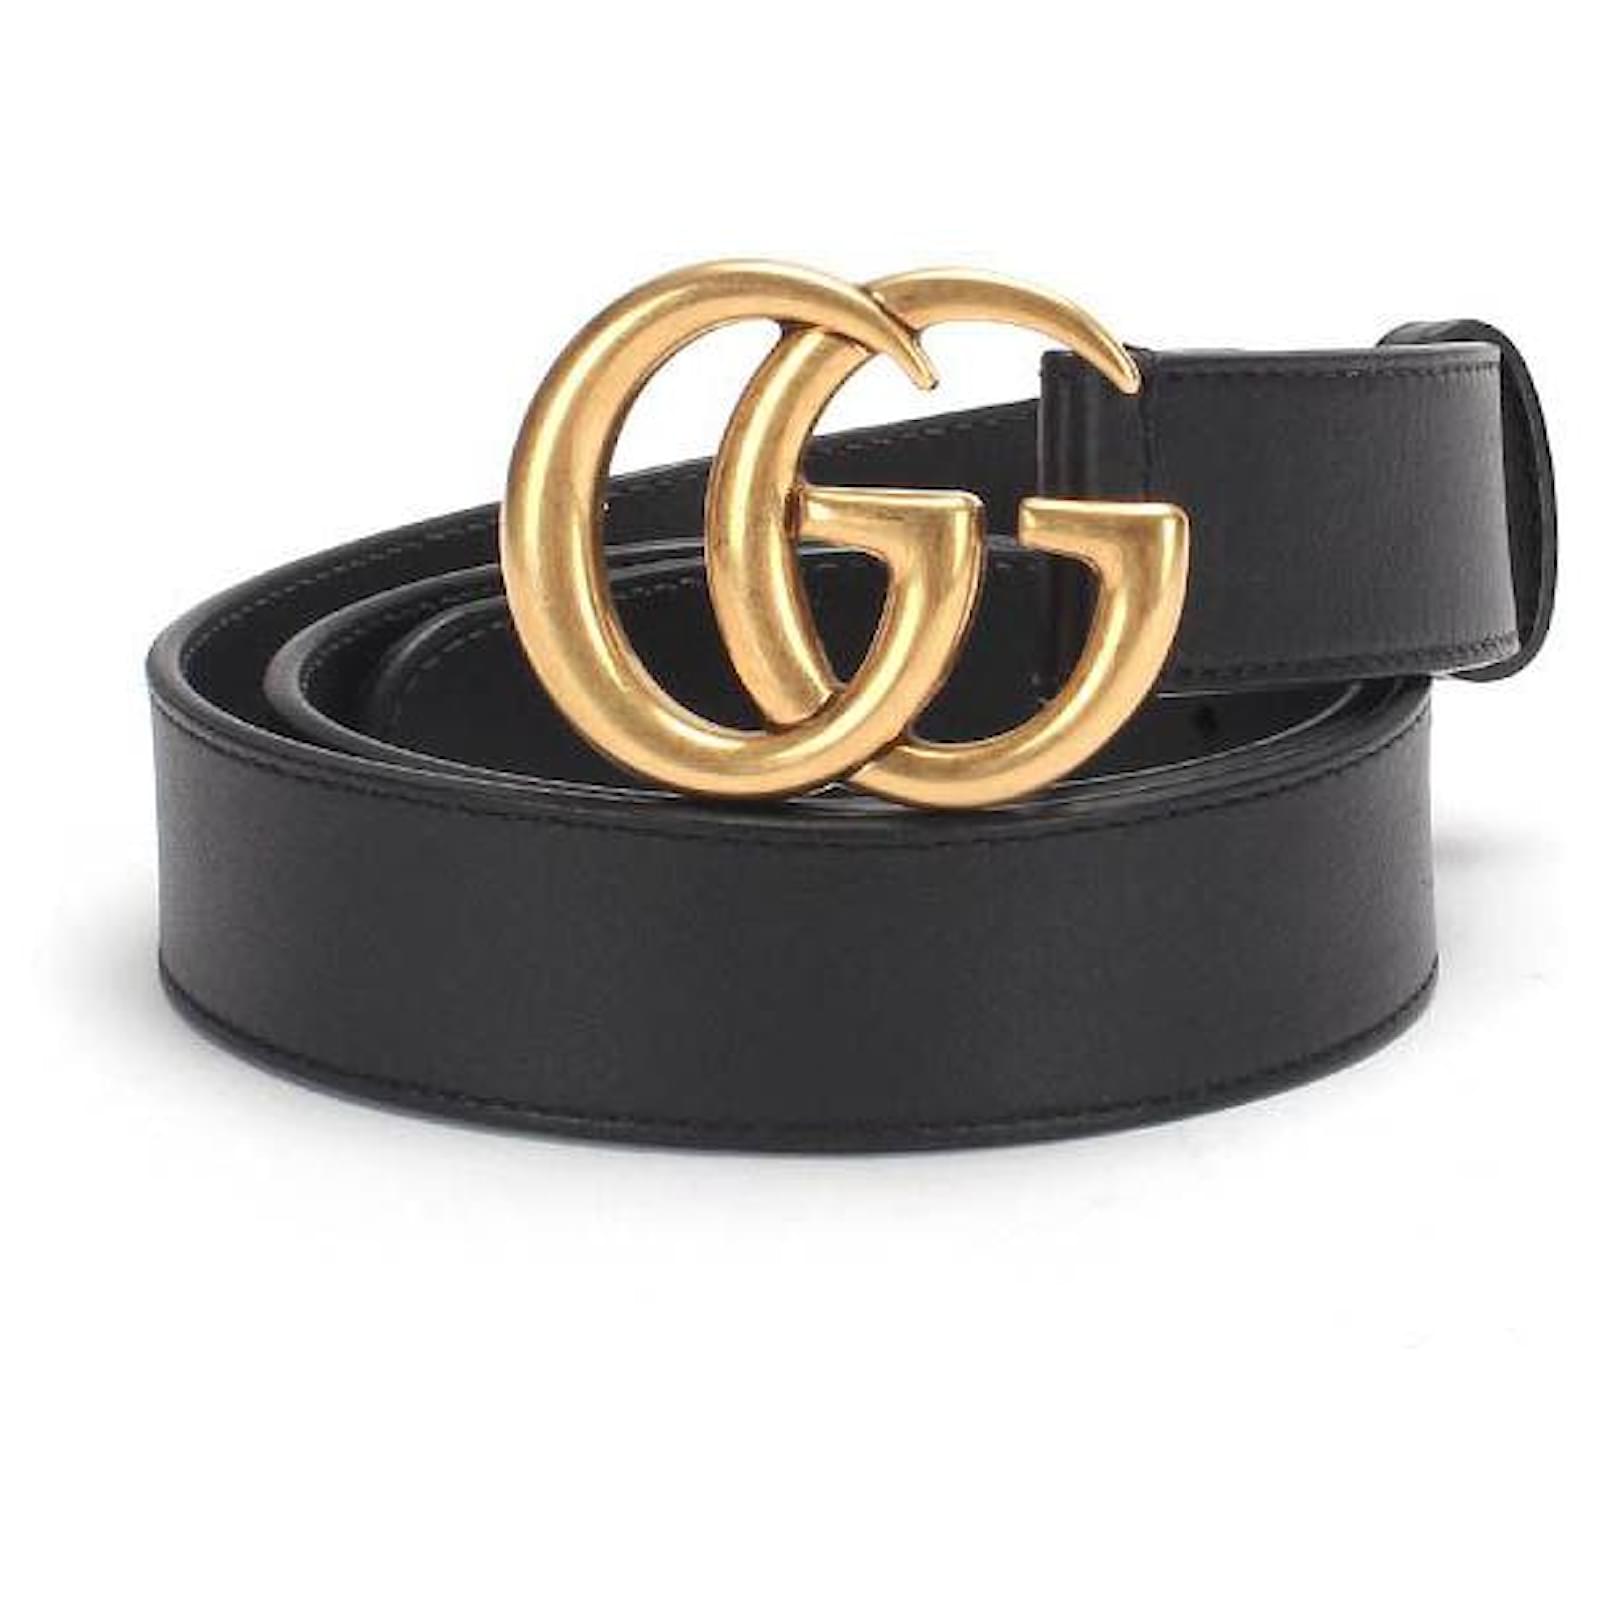 Gucci GG Marmont Leather Belt in black calfskin leather Pony-style ...